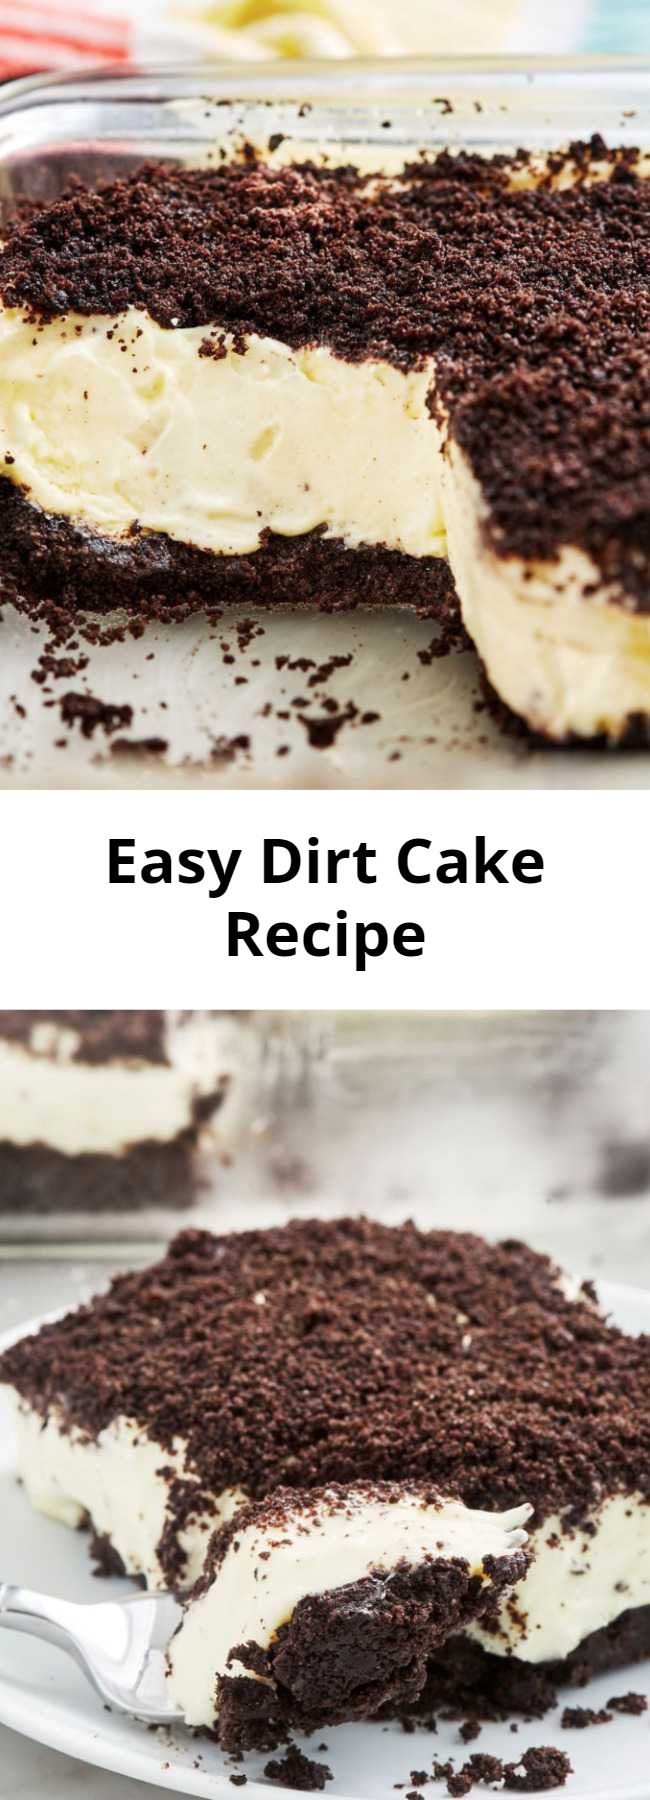 Easy Dirt Cake Recipe - Kids and adults alike will love to dig into this Dirt Cake. Throw some gummy worms on top to make it a little creepier!